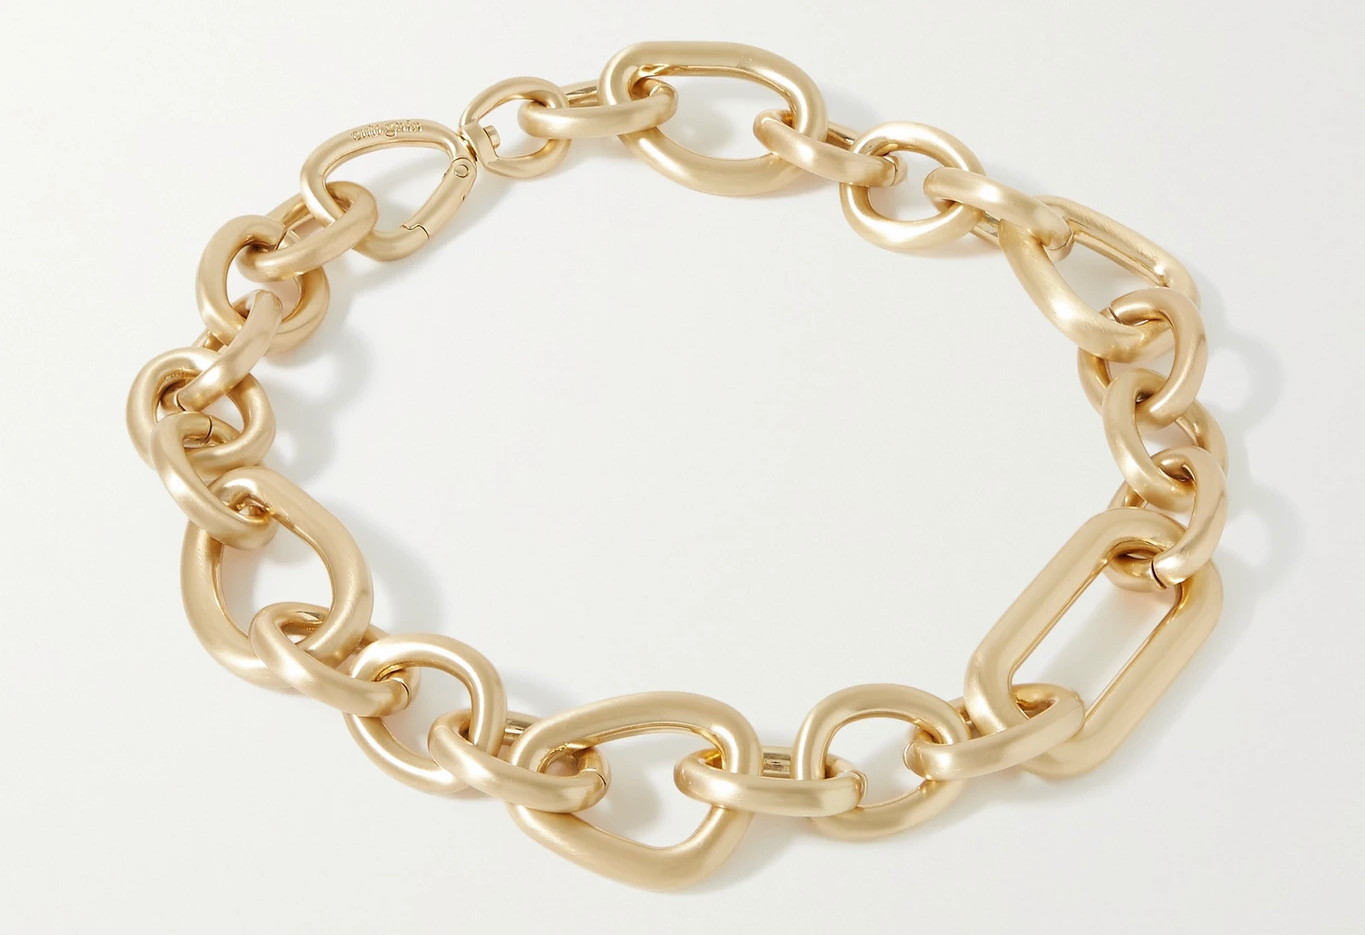 Habitually Chic® » What You Need Now: A Gold Chain Necklace